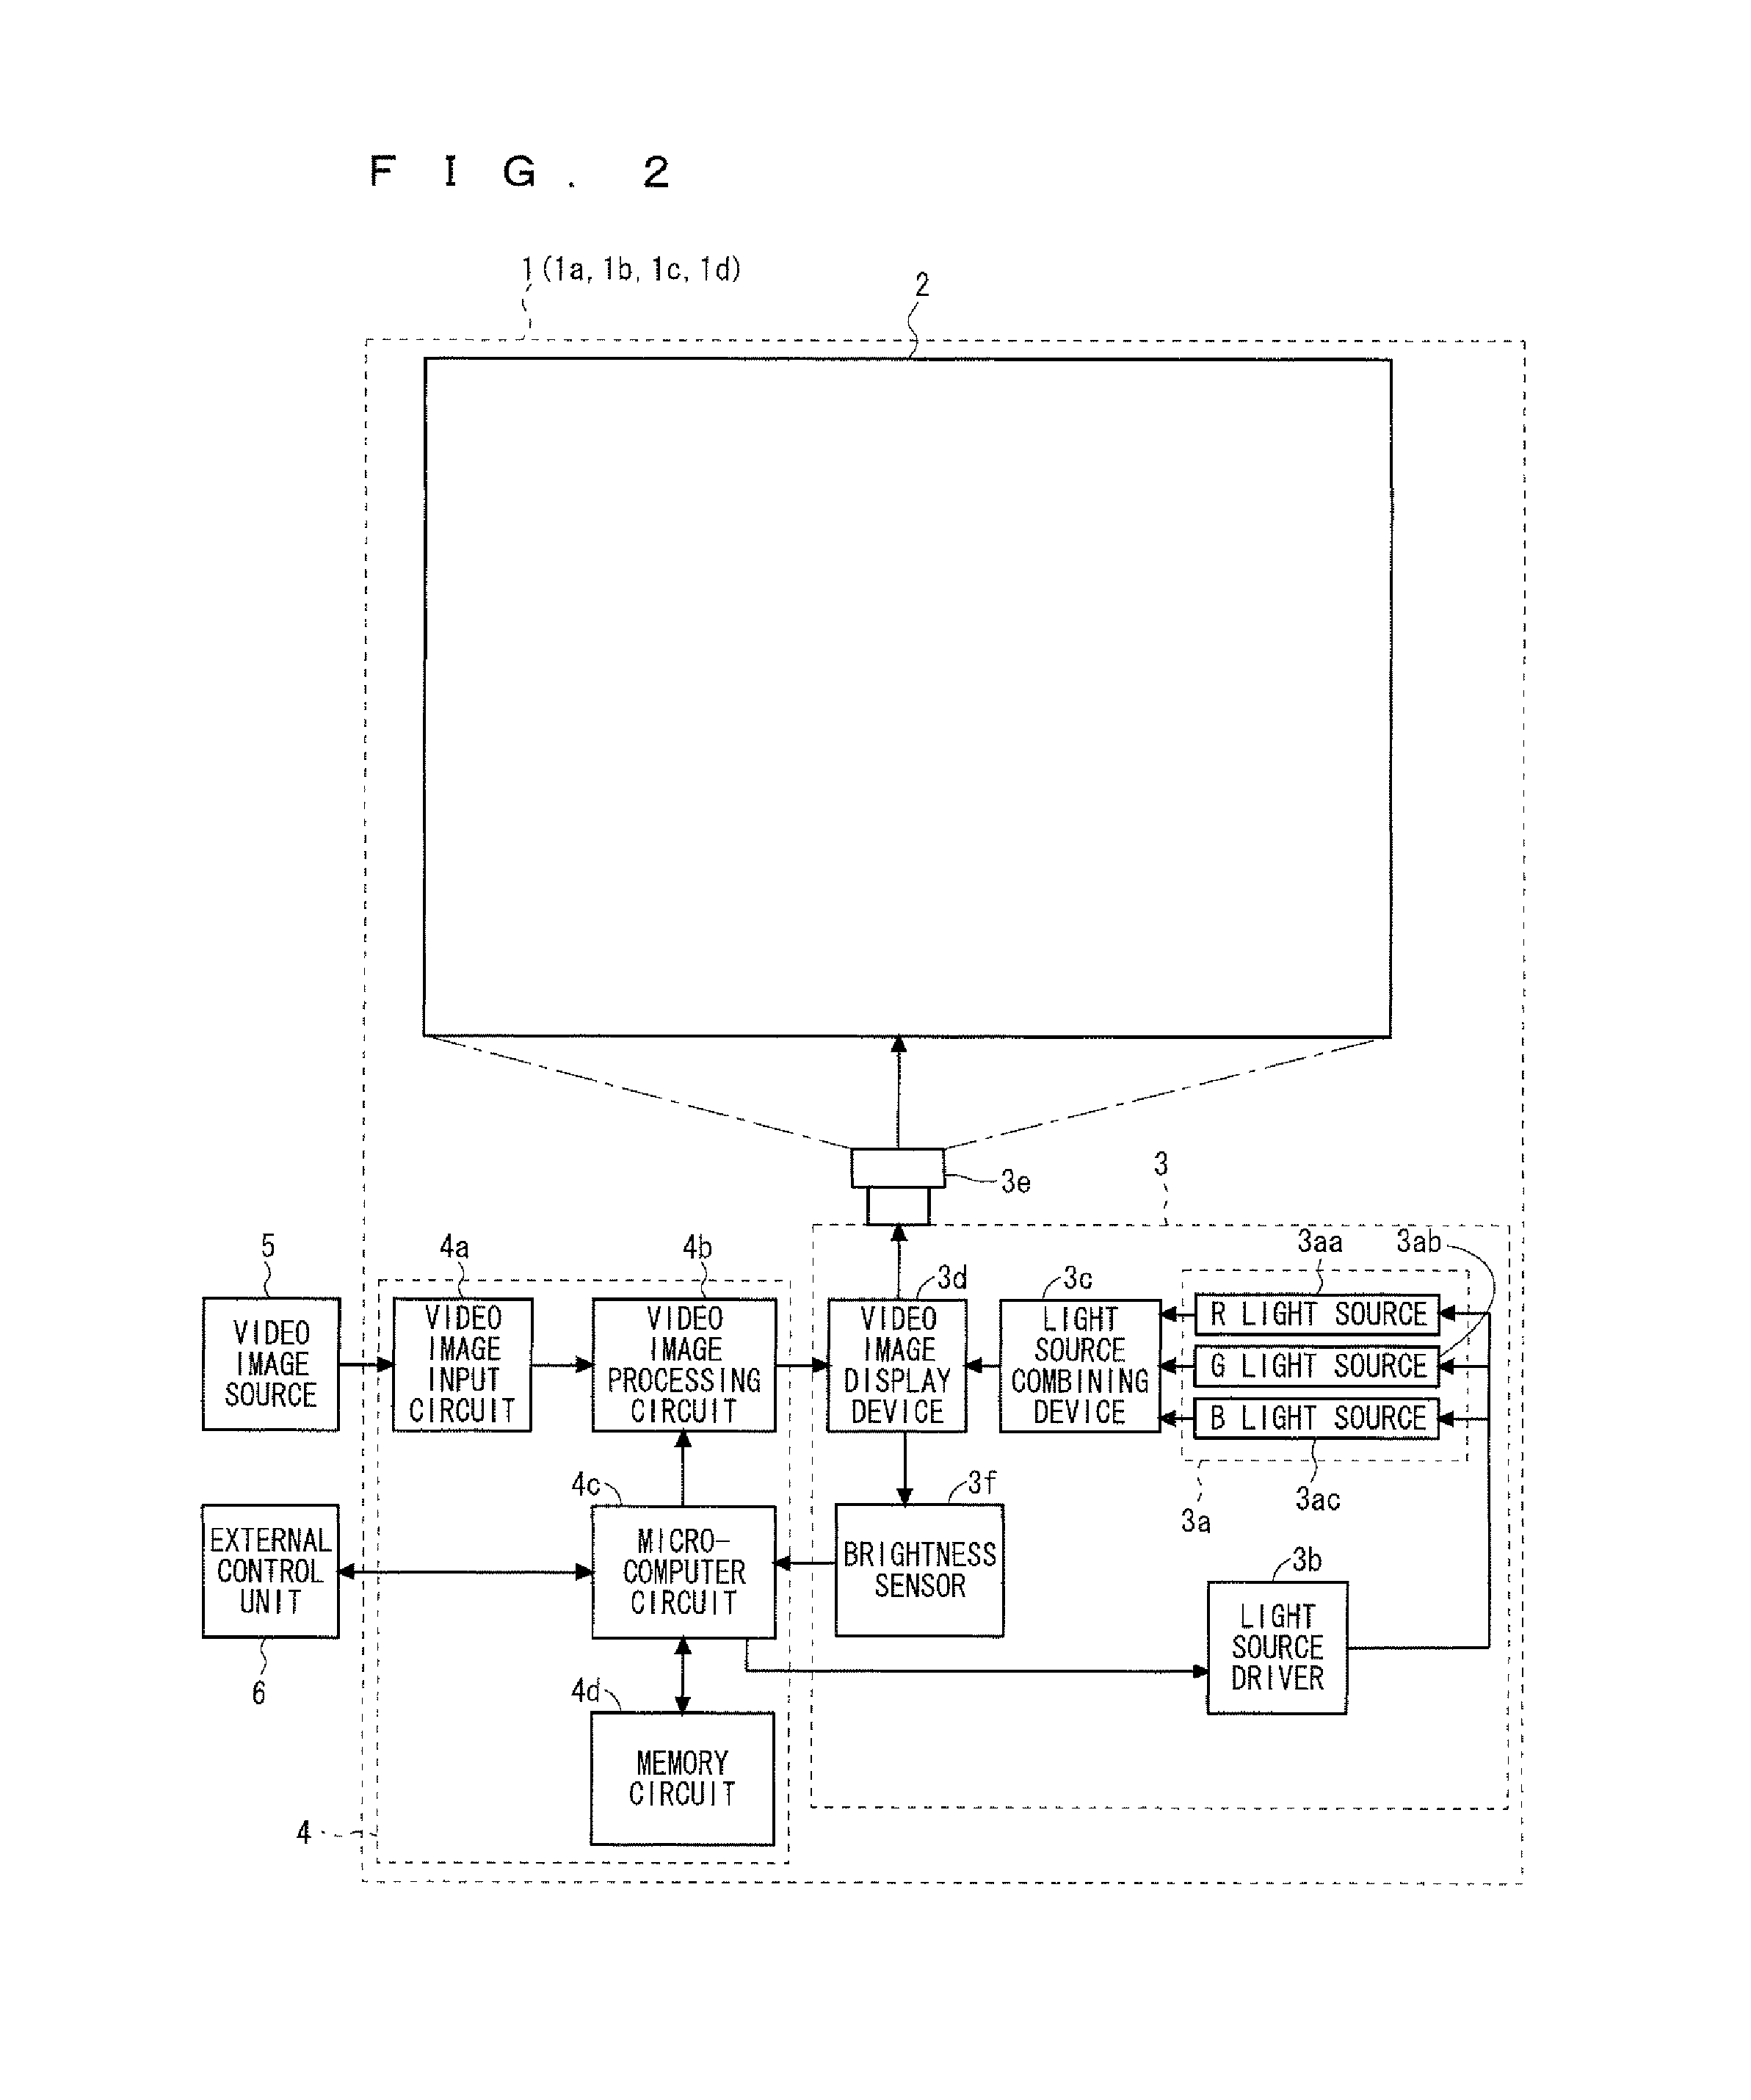 Multi-screen display apparatus that determines common target brightness for controlling multiple light sources